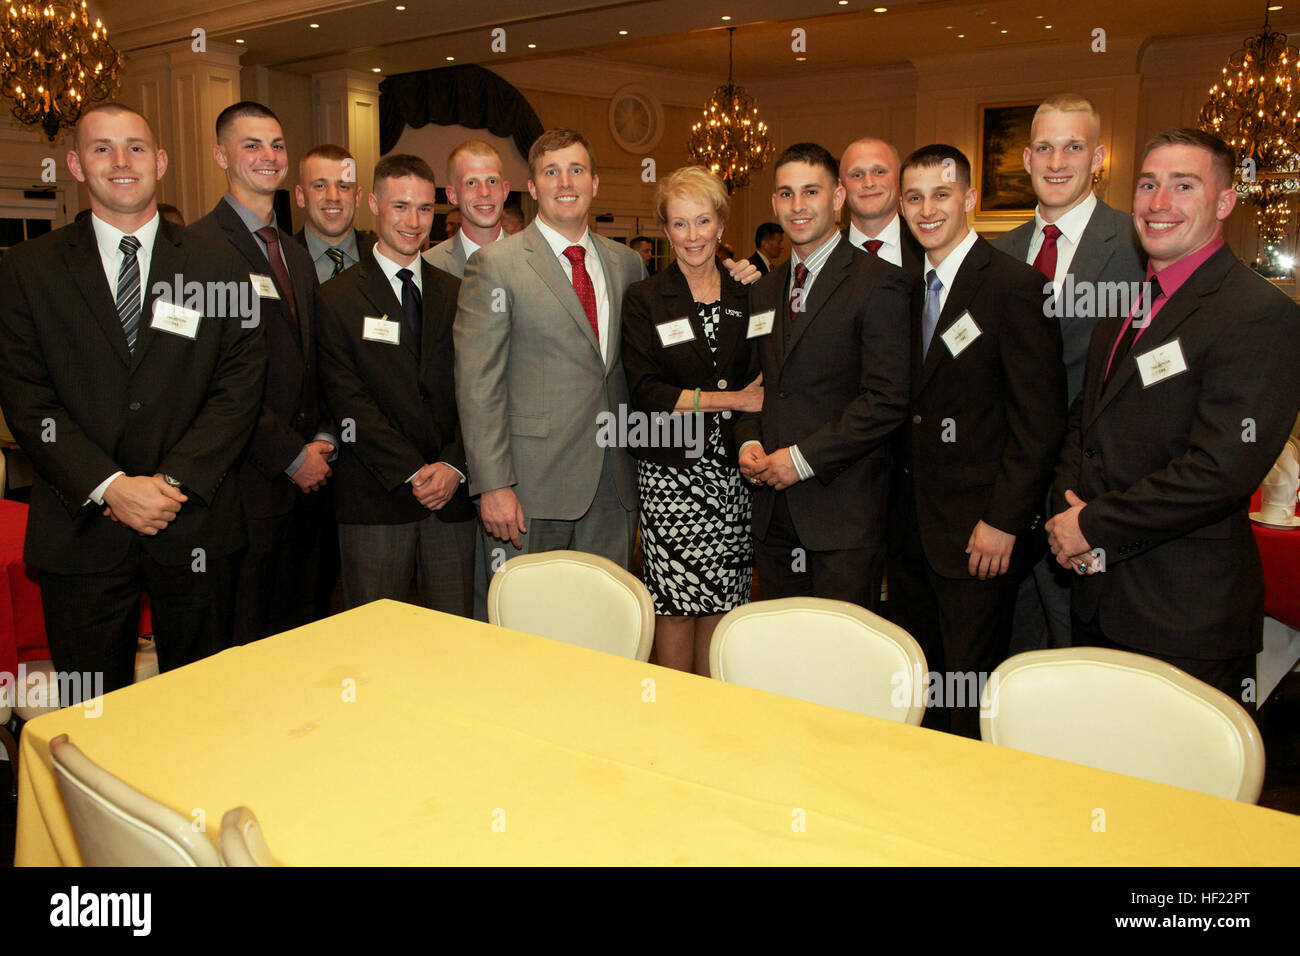 The First Lady of the Marine Corps, Bonnie Amos, center right, and Medal of Honor recipient Sgt. Dakota Meyer, center left, pose for a photo with Marines from The Basic School during a dinner hosted by the Marine Corps Aviation Association at the Army Navy Country Club in Arlington, Va., April 8, 2014. (U.S. Marine Corps photo by Sgt. Mallory S. VanderSchans/Released) Marine Corps Commandant Attends Marine Corps Aviation Association Dinner 140408-M-LU710-126 Stock Photo